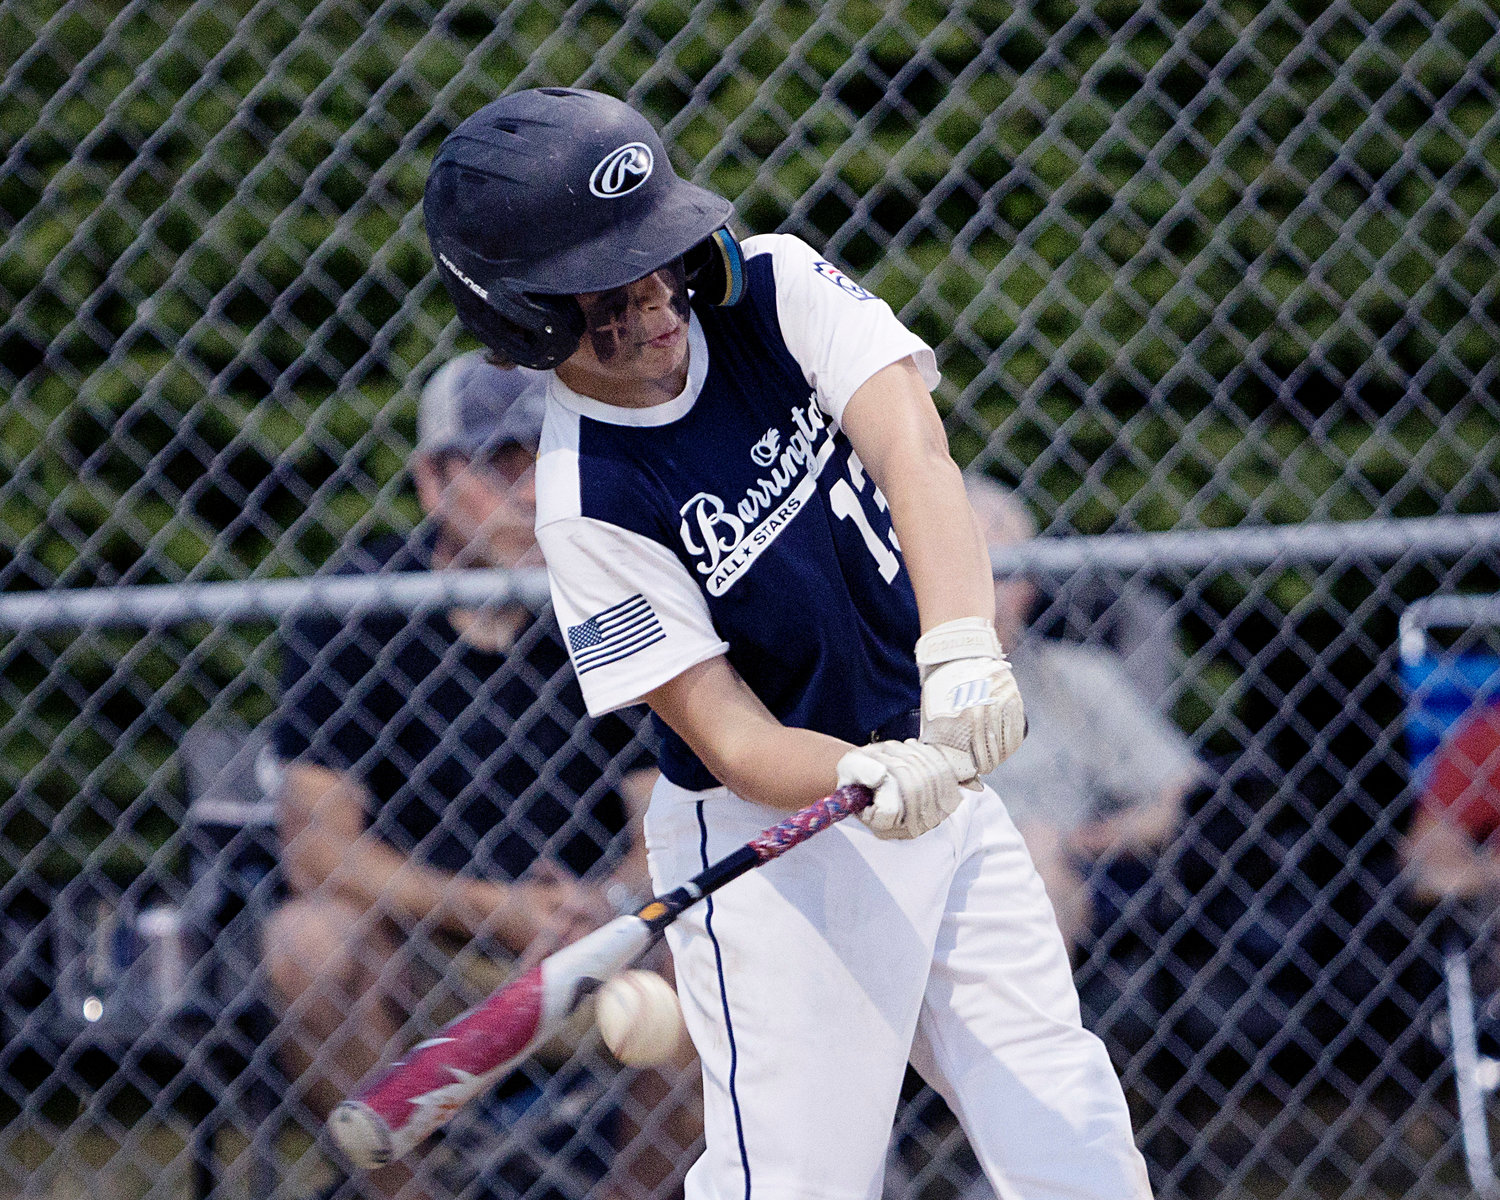 Sean Calderella makes contact while batting against Cranston East in the 11U All-Star State Tournament, Wednesday.